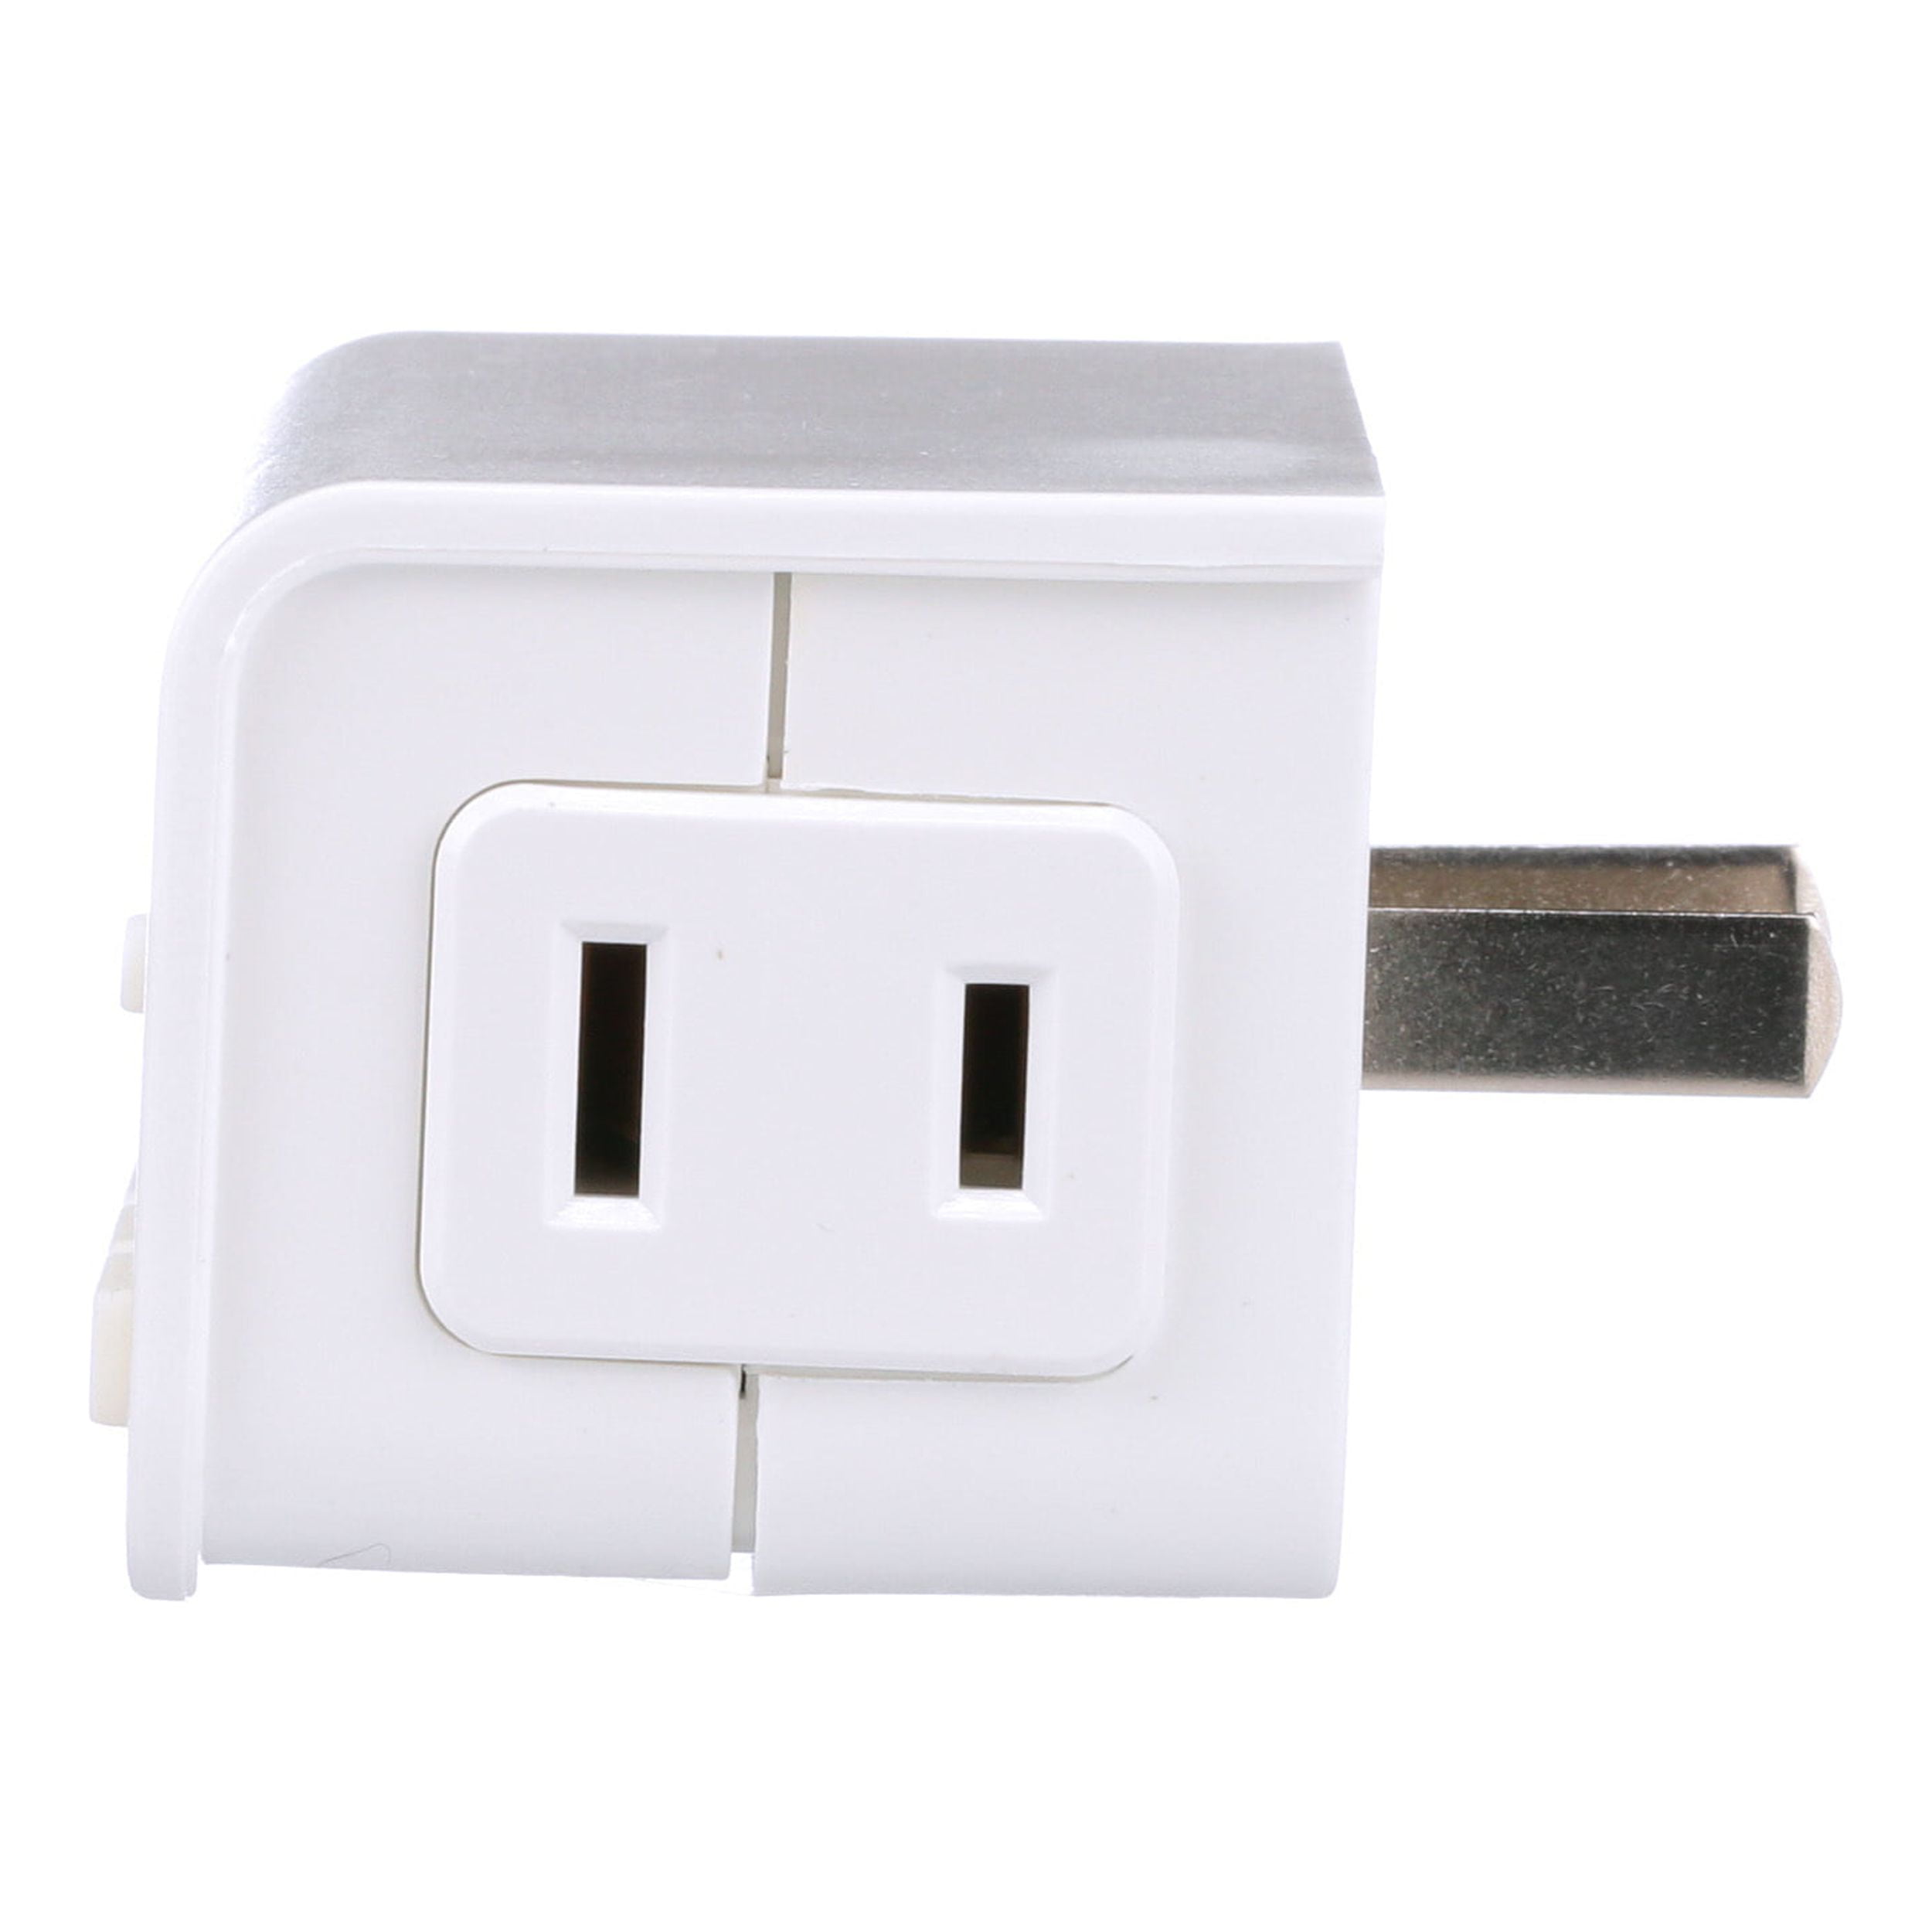 Black Friday Week: Control your indoor Christmas lights with this smart  plug - now £12.99